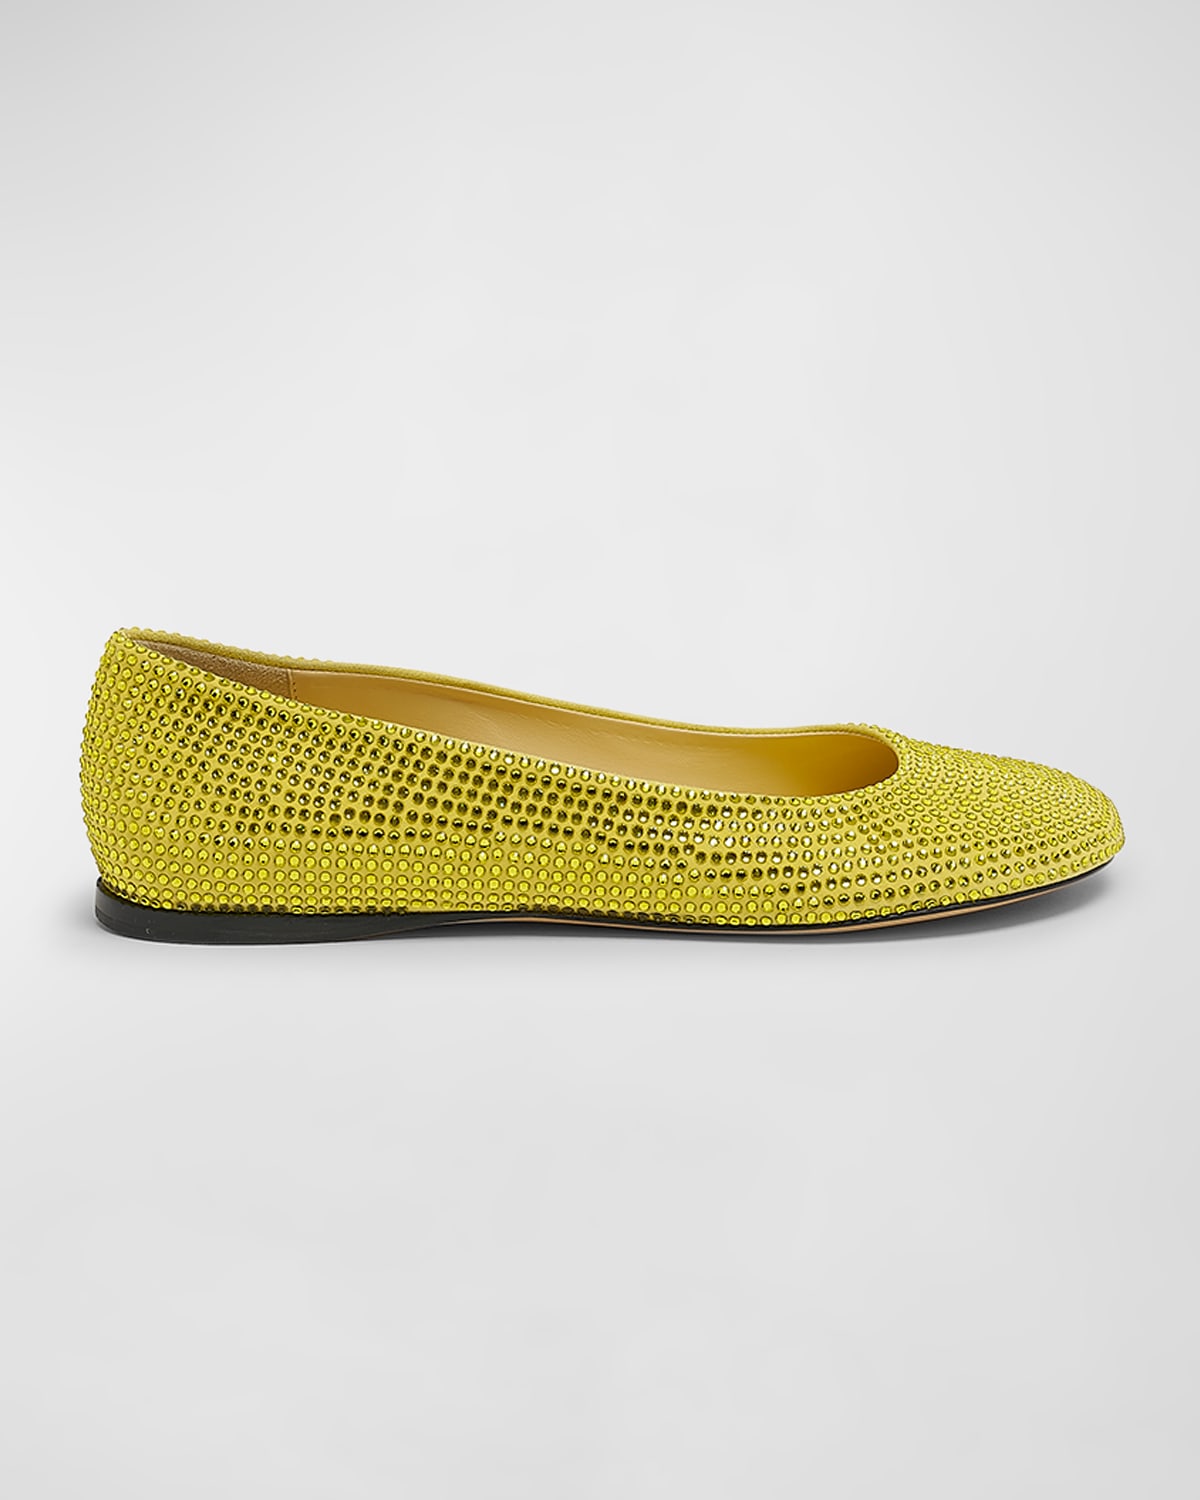 Loewe Toy Strass Leather Ballerina Flats In Yellow